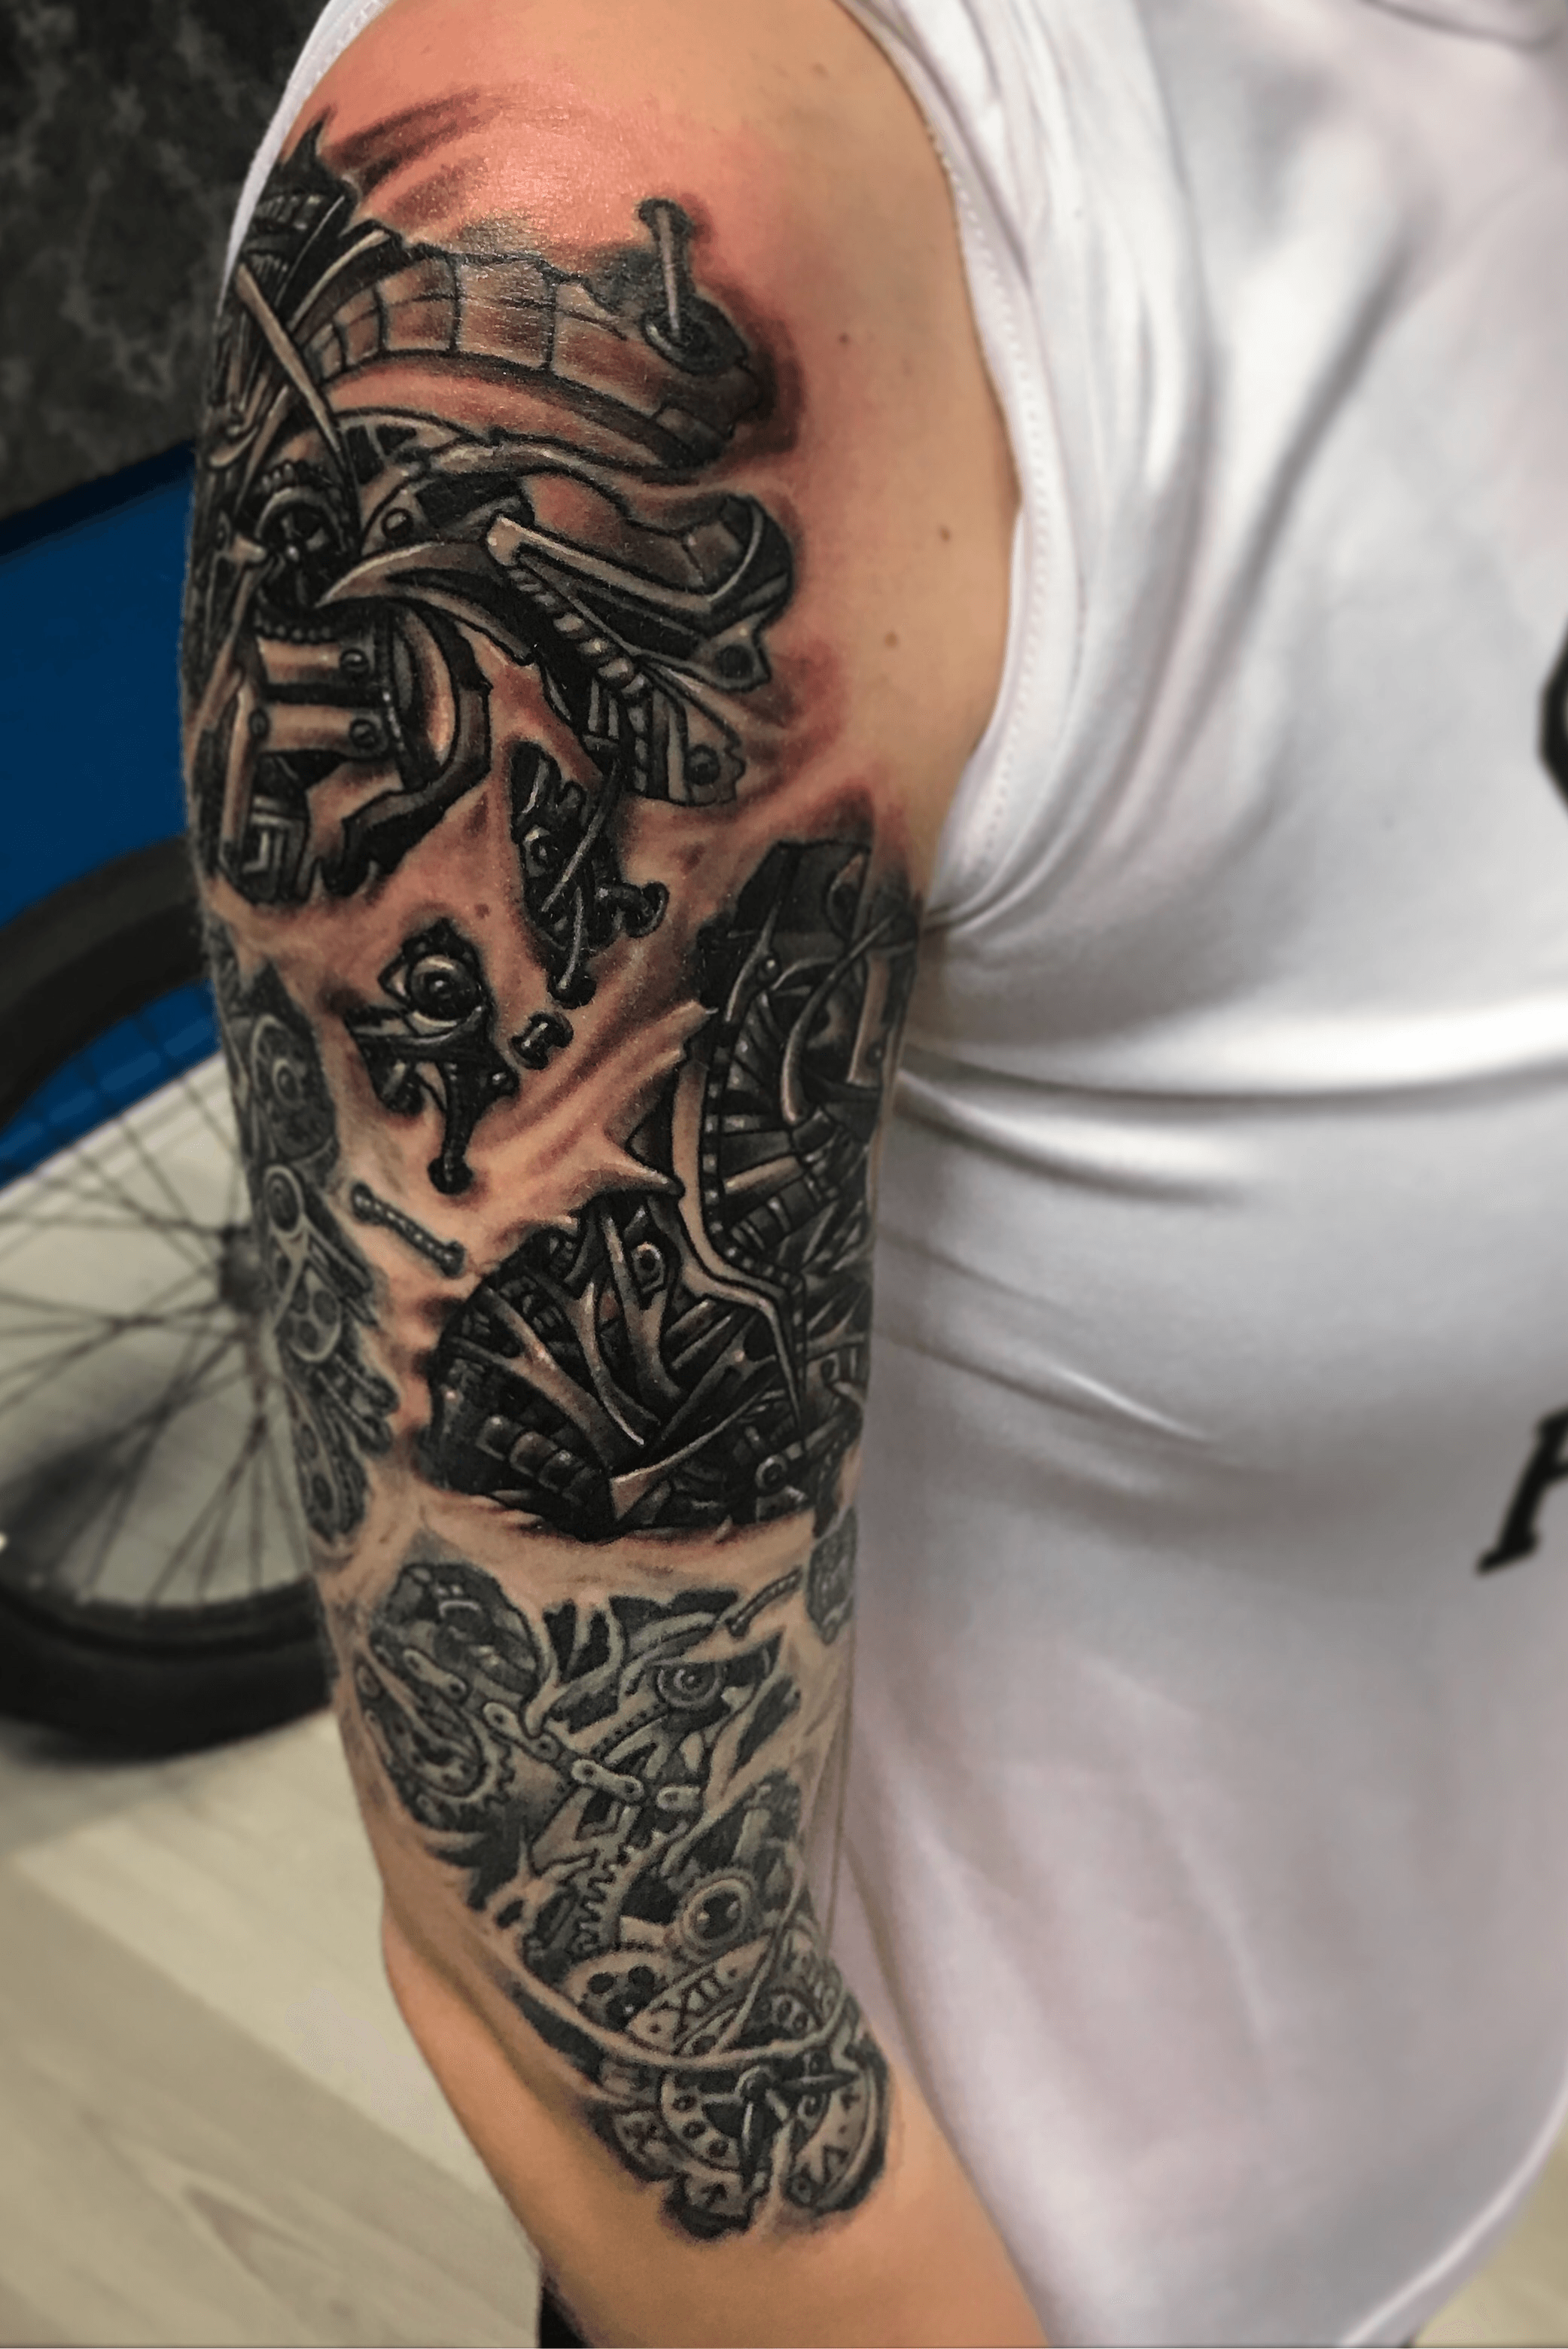 25 Tattoo Ideas of the Day  May 1 2020